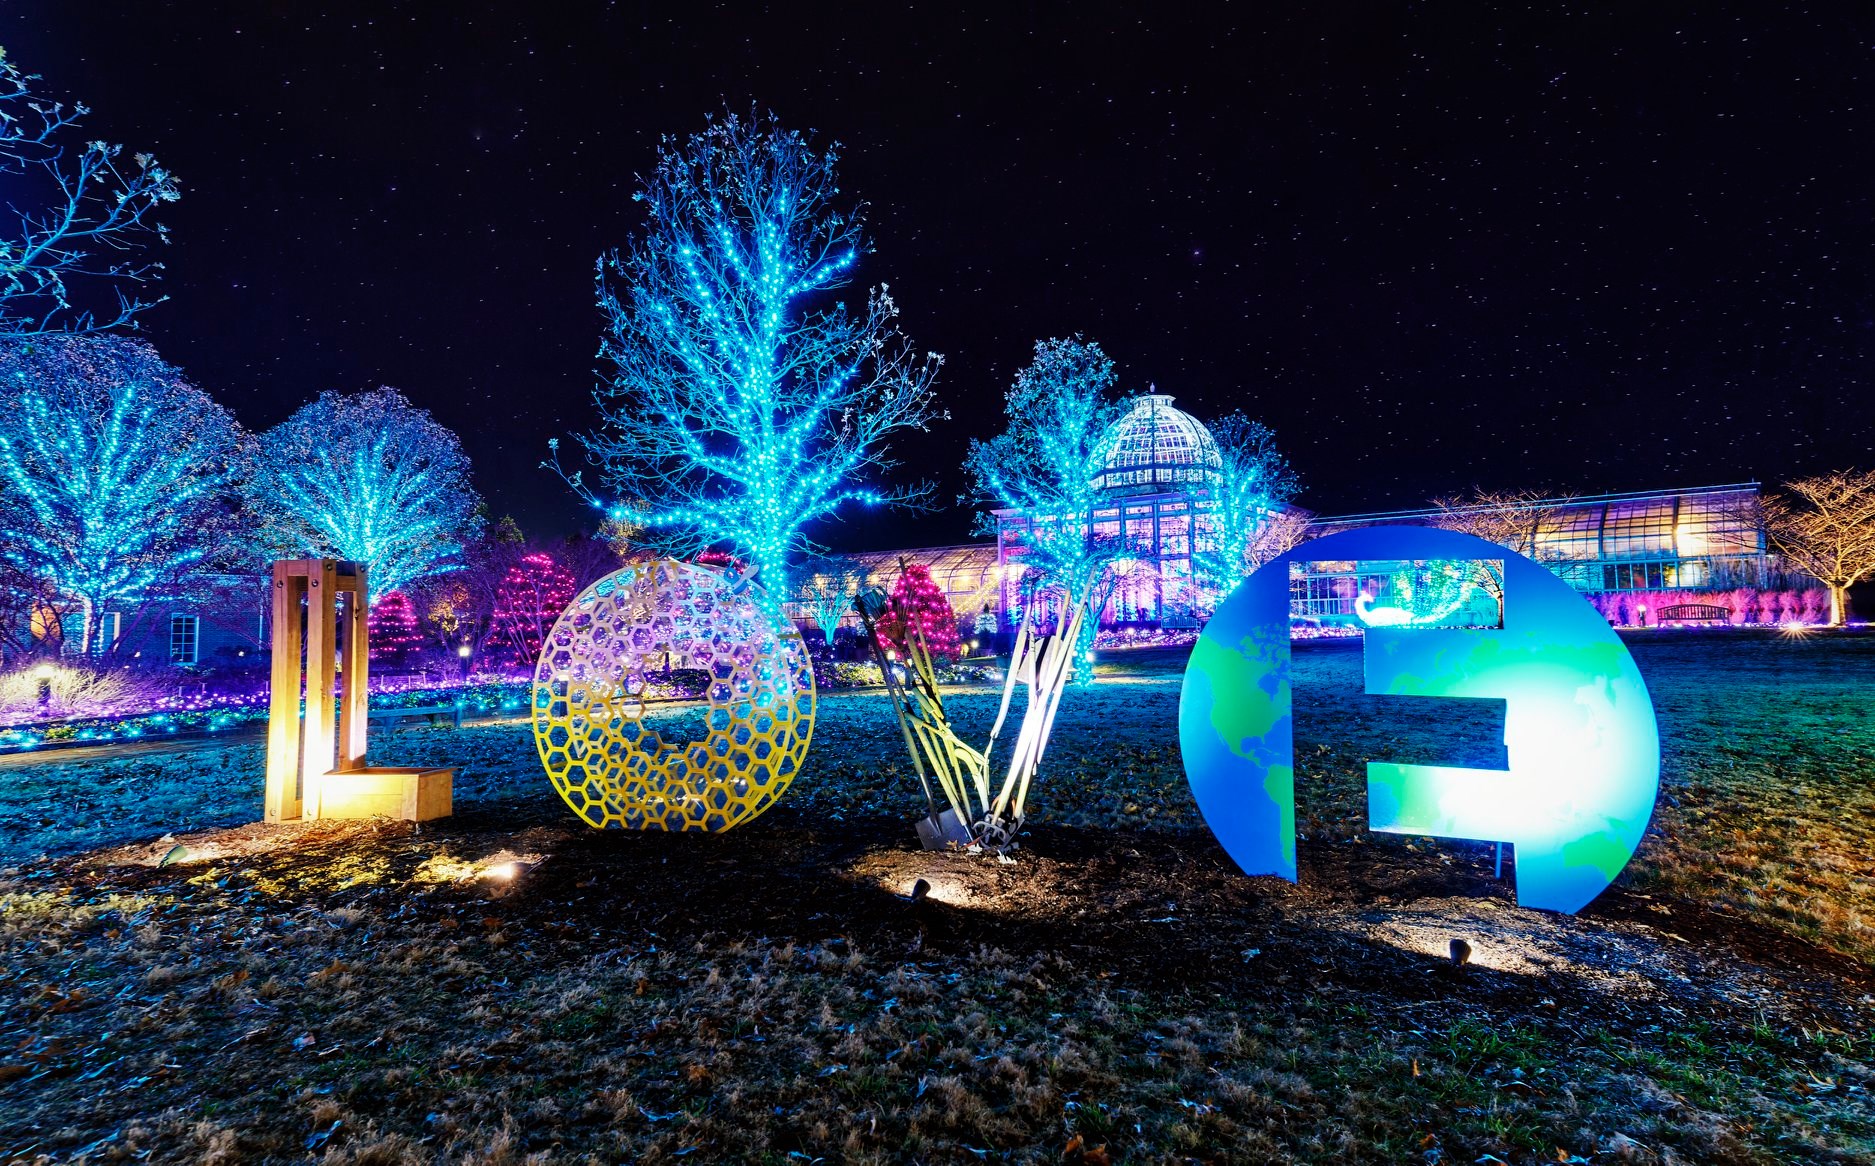 LOVE works lit at night for GardenFest. If you LOVE Lewis Ginter Botanical Garden donate to support our mission. Image by James Loving